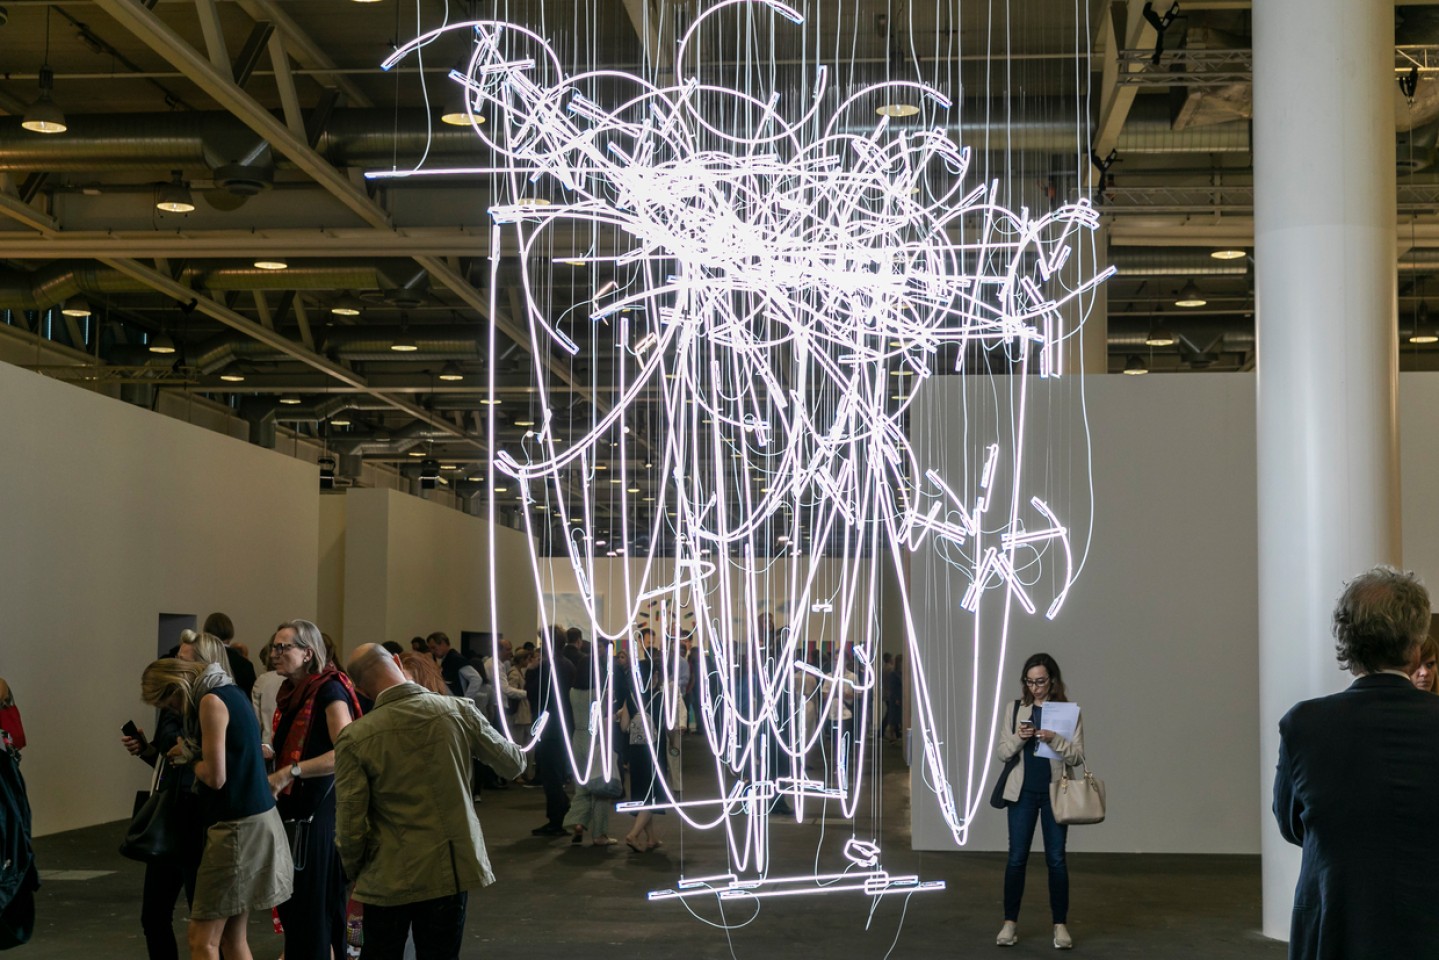 Art Basel 2018! If it can’t be contained in a booth, you will see it at “Unlimited”